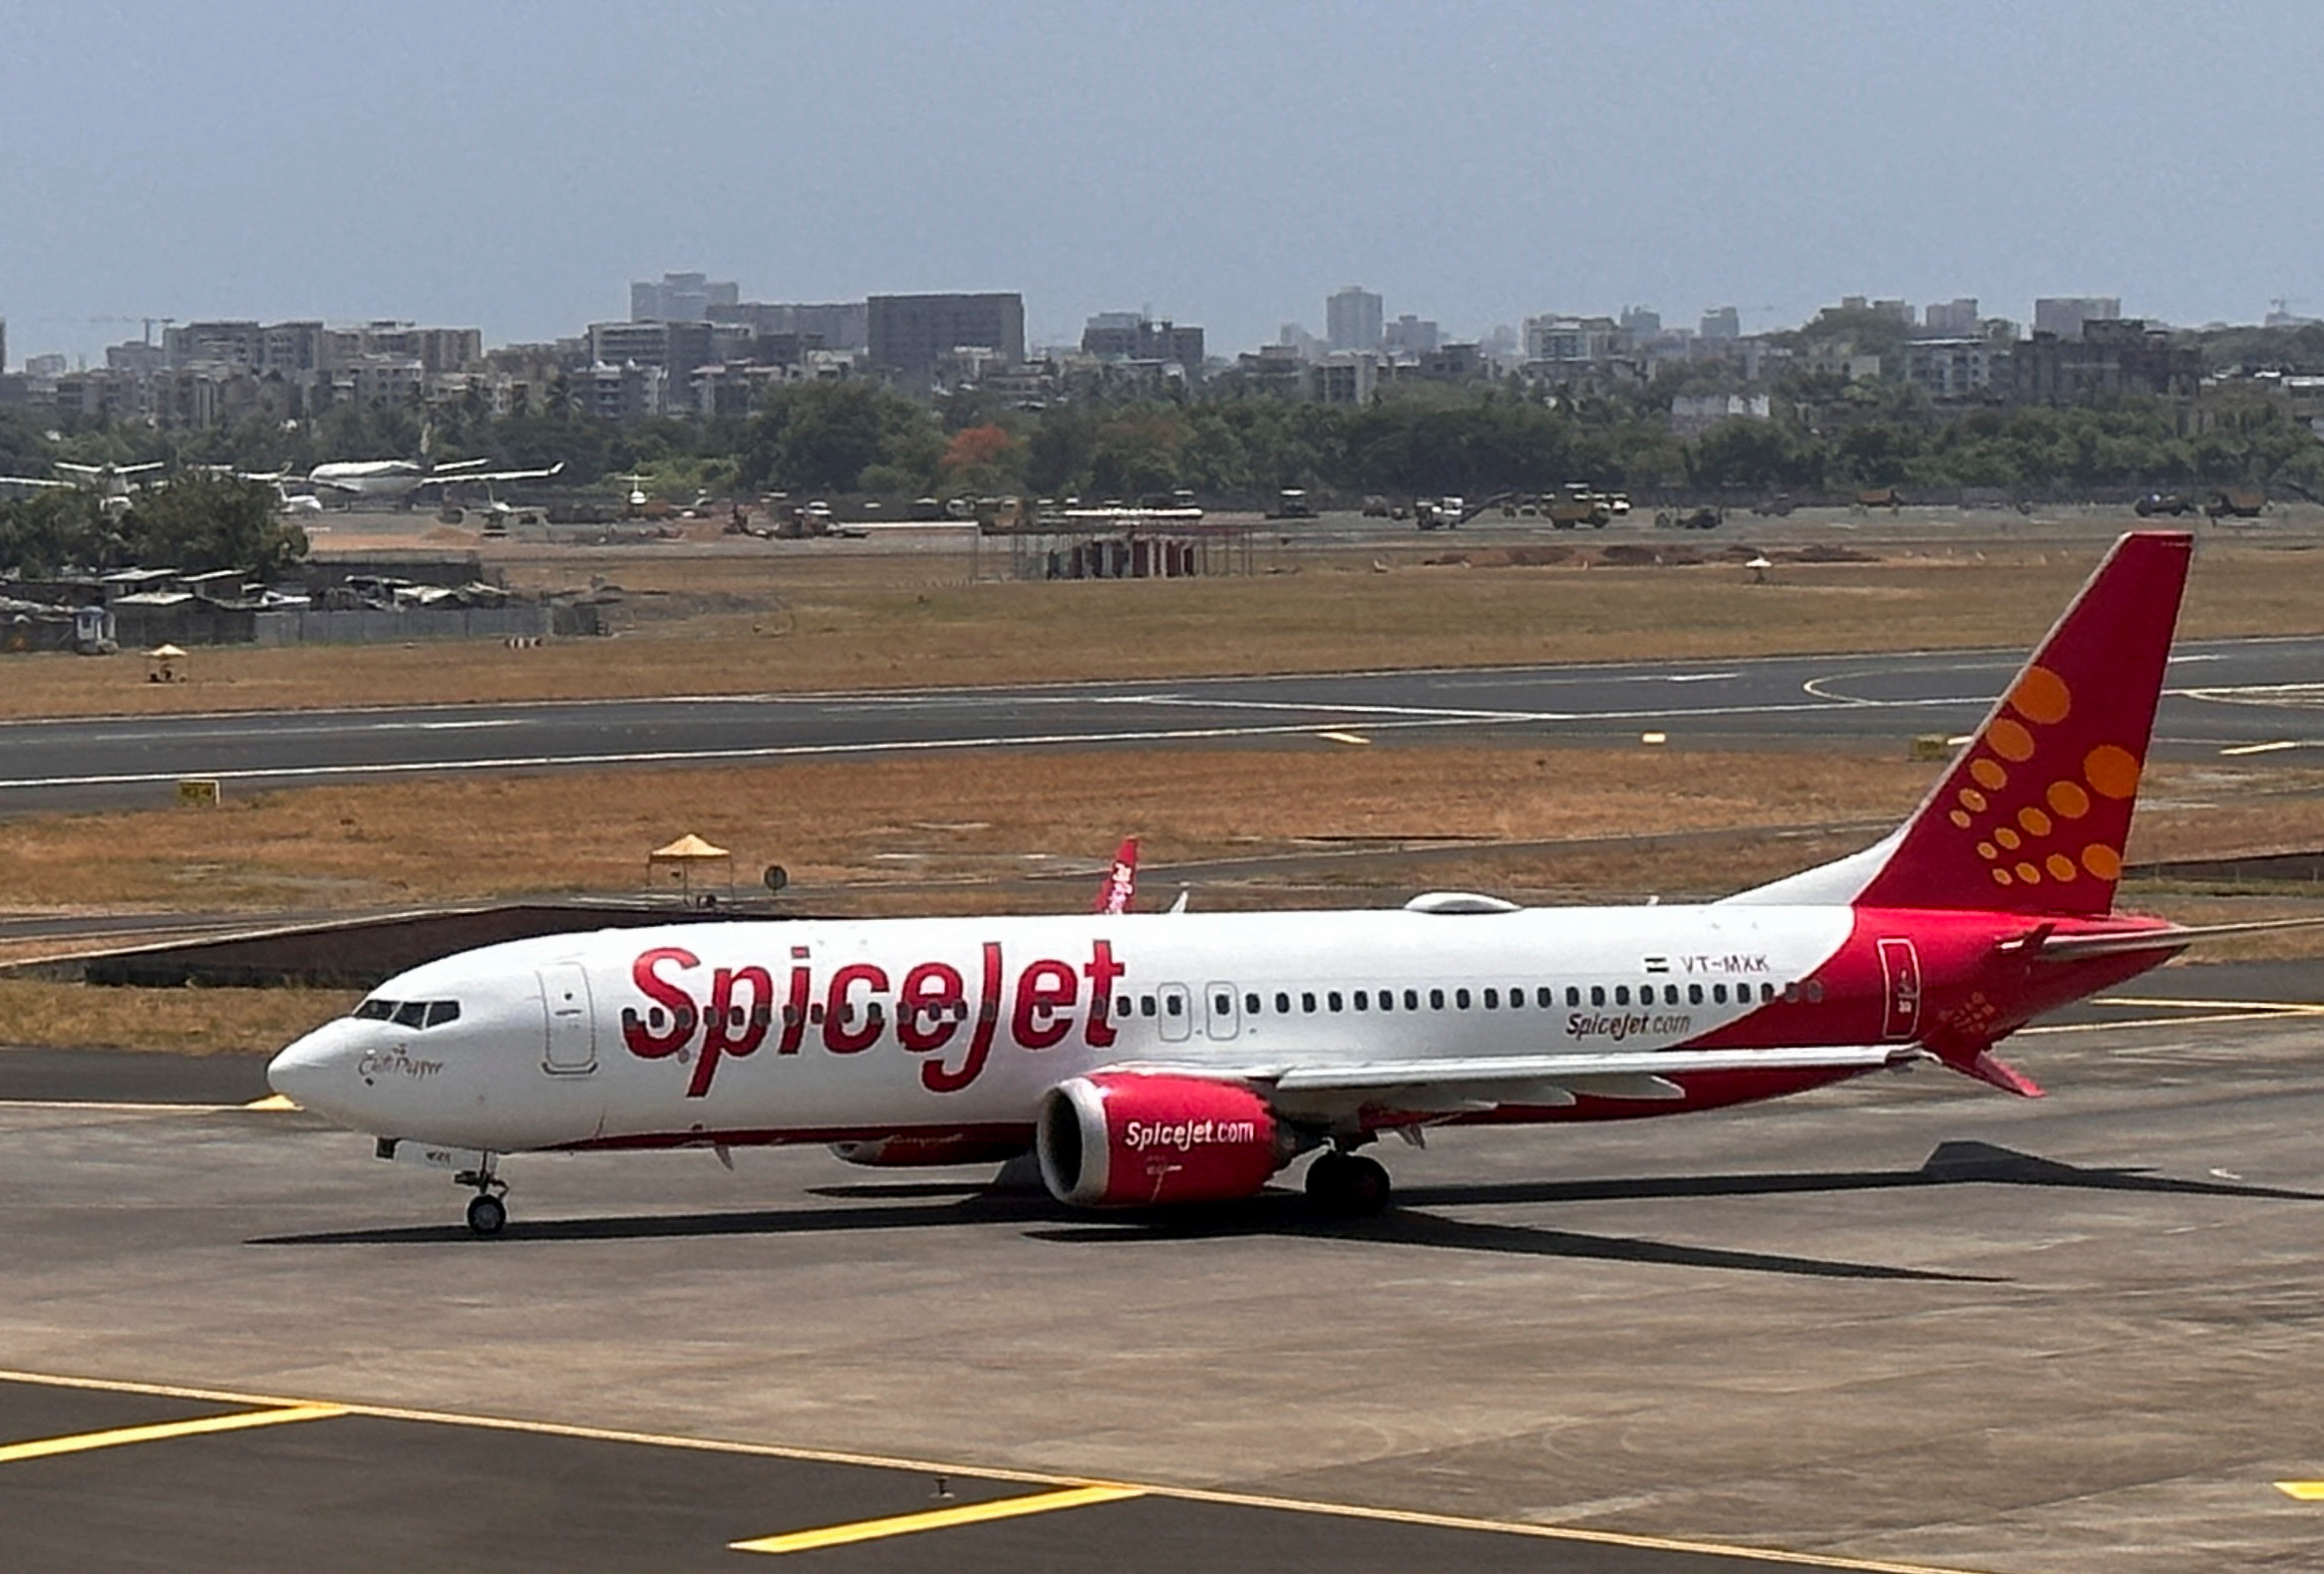 SpiceJet passenger airplane on a runway, with the SpiceJet logo prominent on the tail fin.